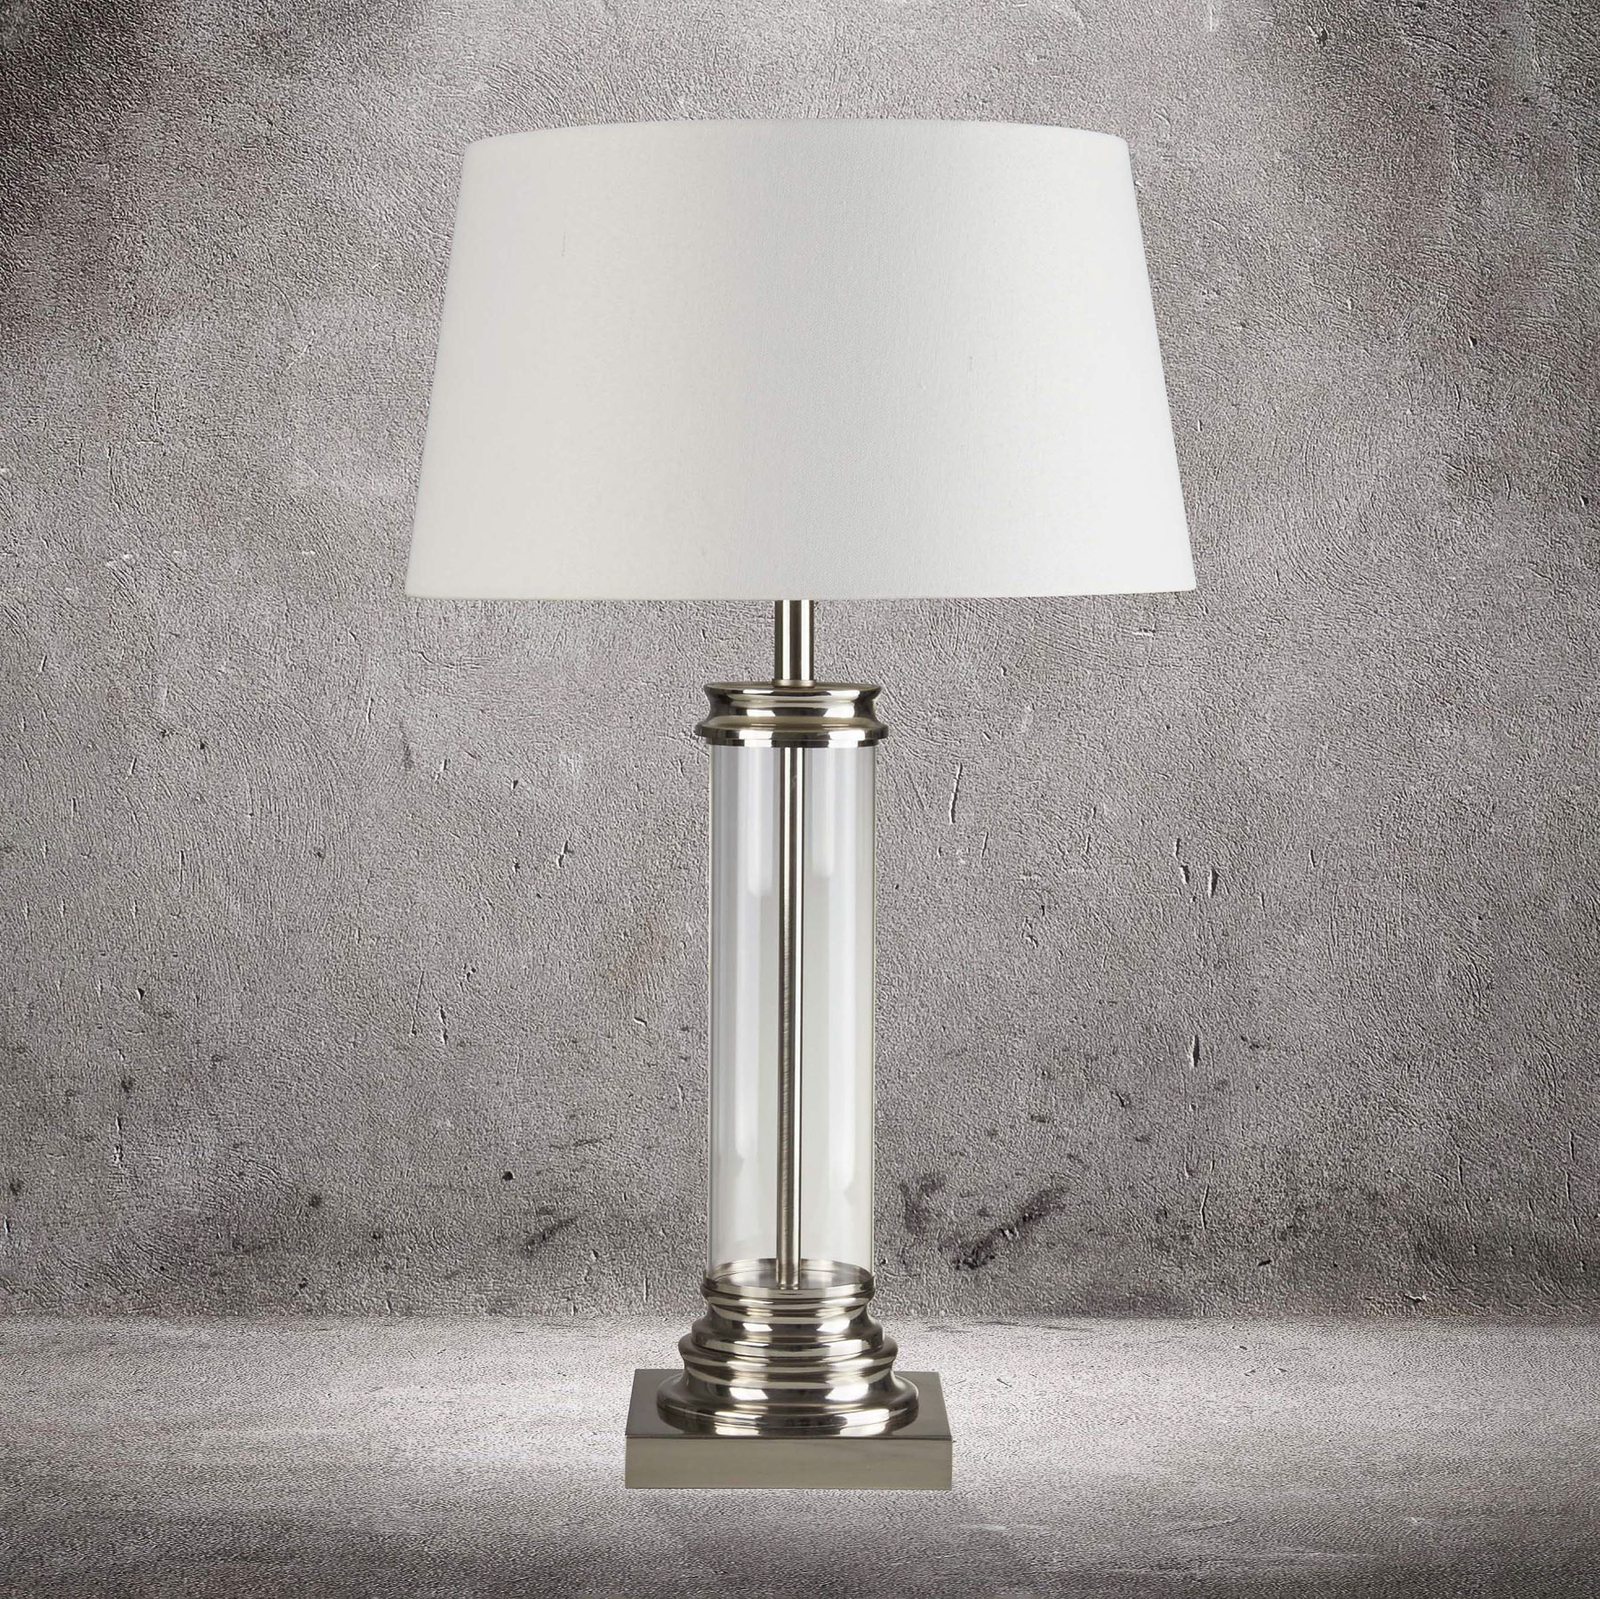 Pedestal table lamp, silver with a cream lampshade